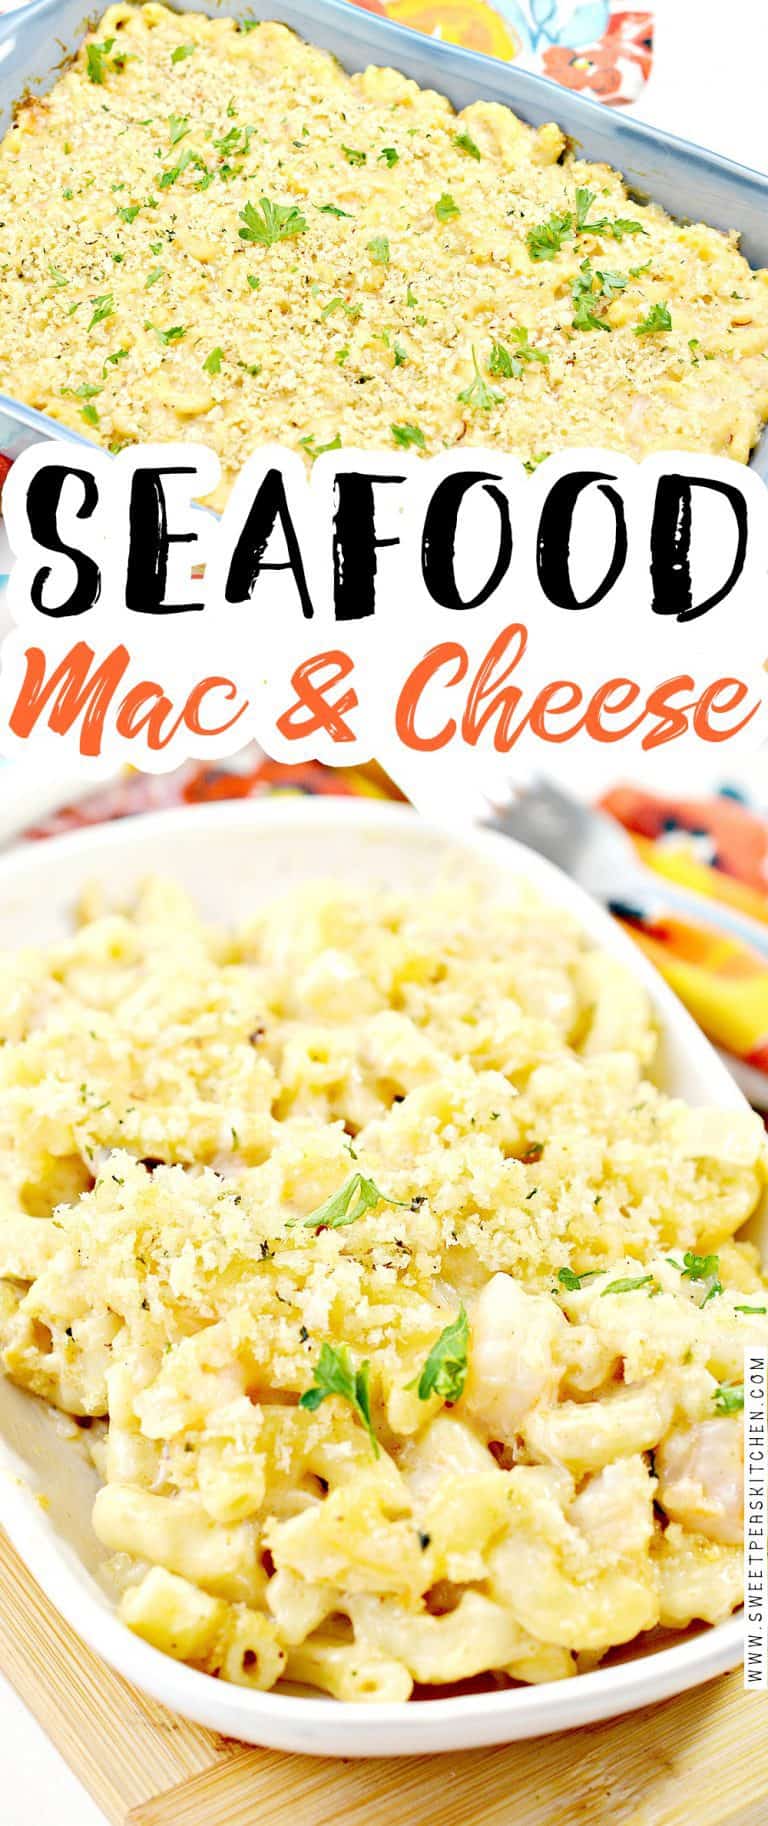 Seafood Mac and Cheese - Sweet Pea's Kitchen